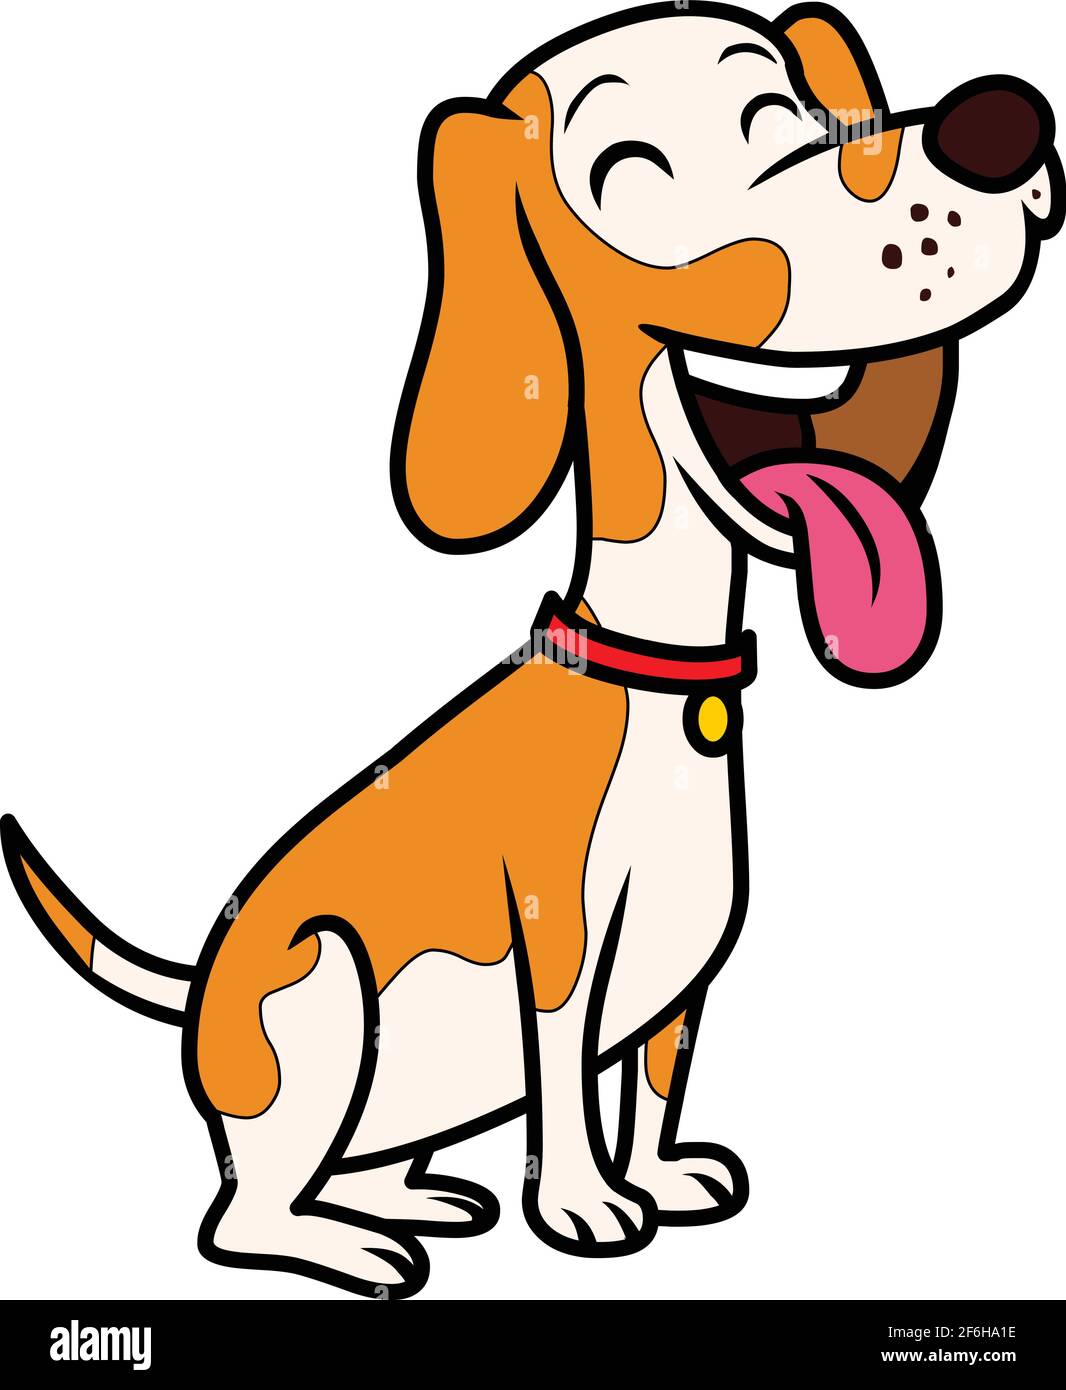 Cartoon dog sitting vector llustration isolated on white background Stock Vector